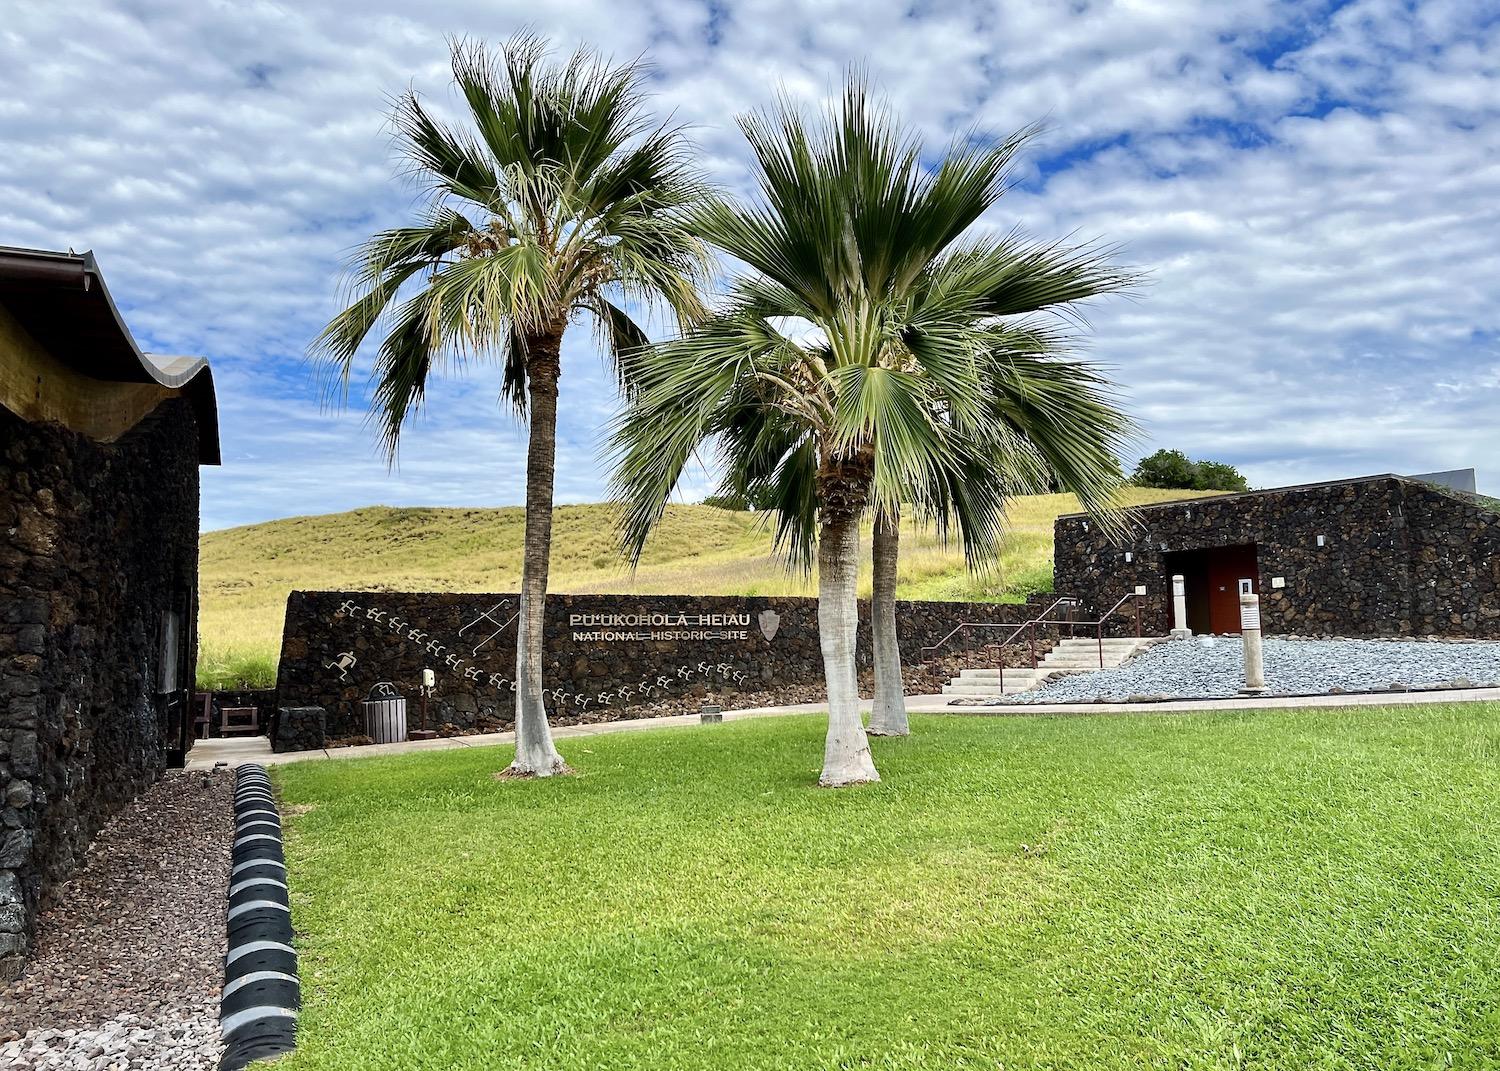 You can almost see the heiau (temple) on the hill at Puʻukoholā Heiau National Historic Site.